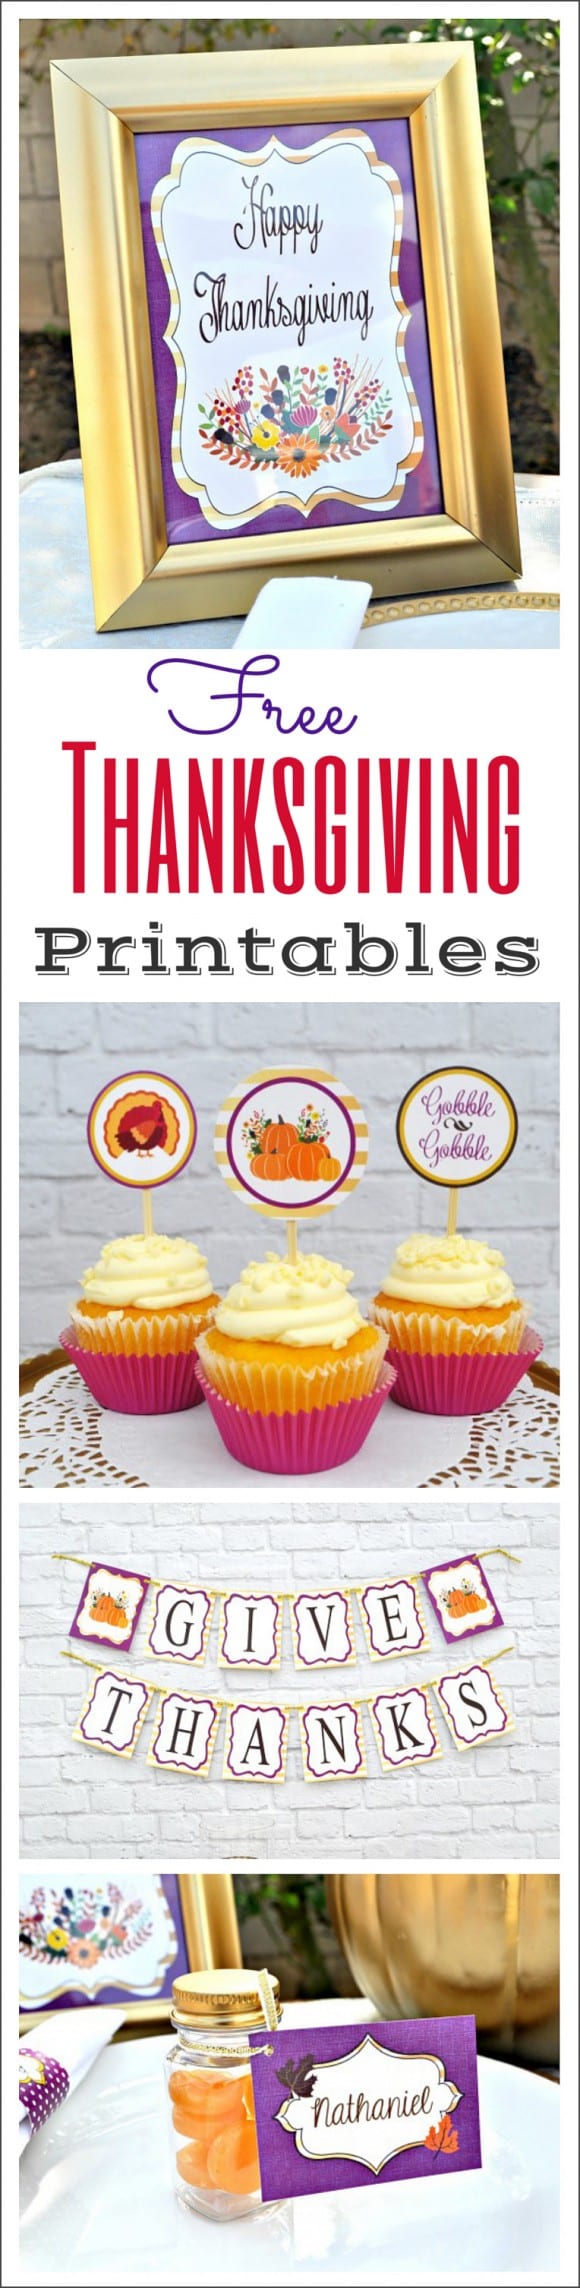 Free Thanksgiving printables | CatchMyParty.com